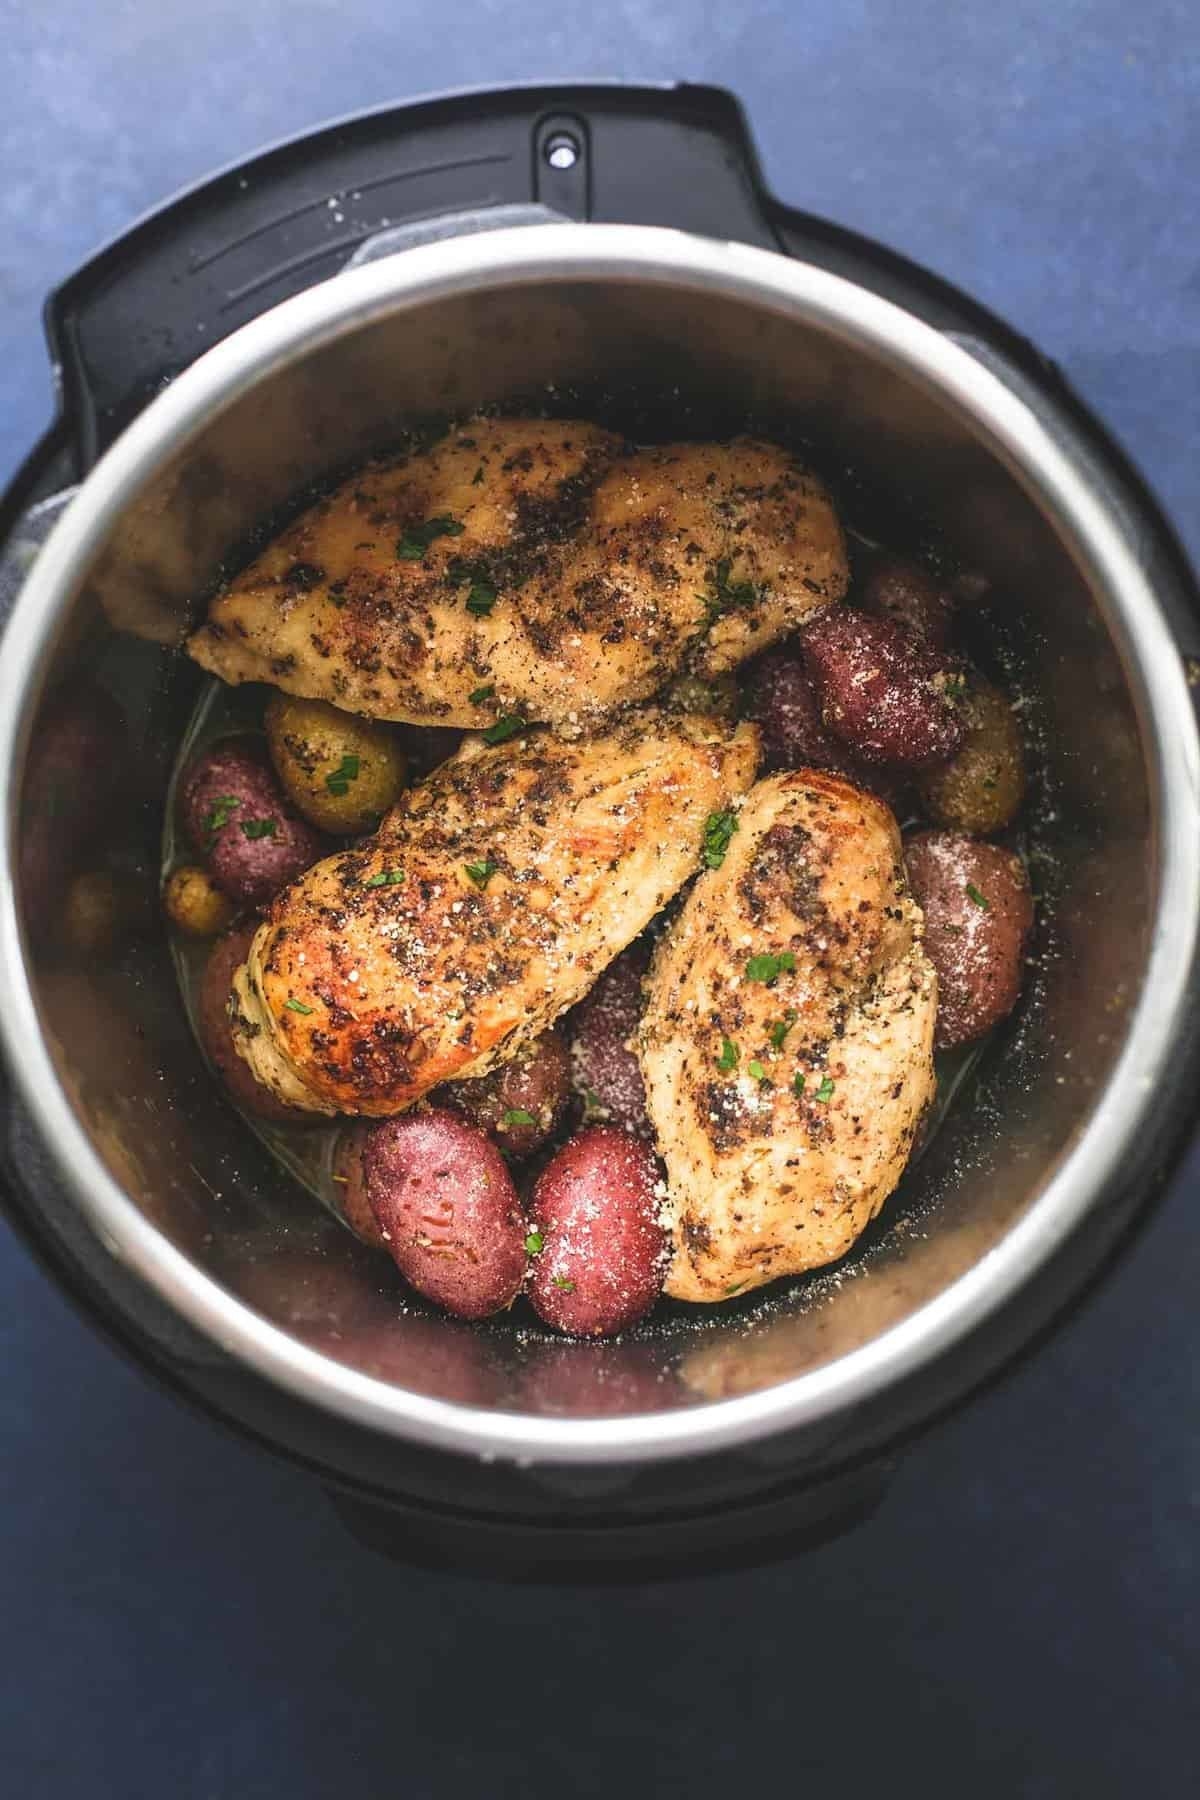 Chicken and tri-color potatoes, cooked through in an Instant Pot